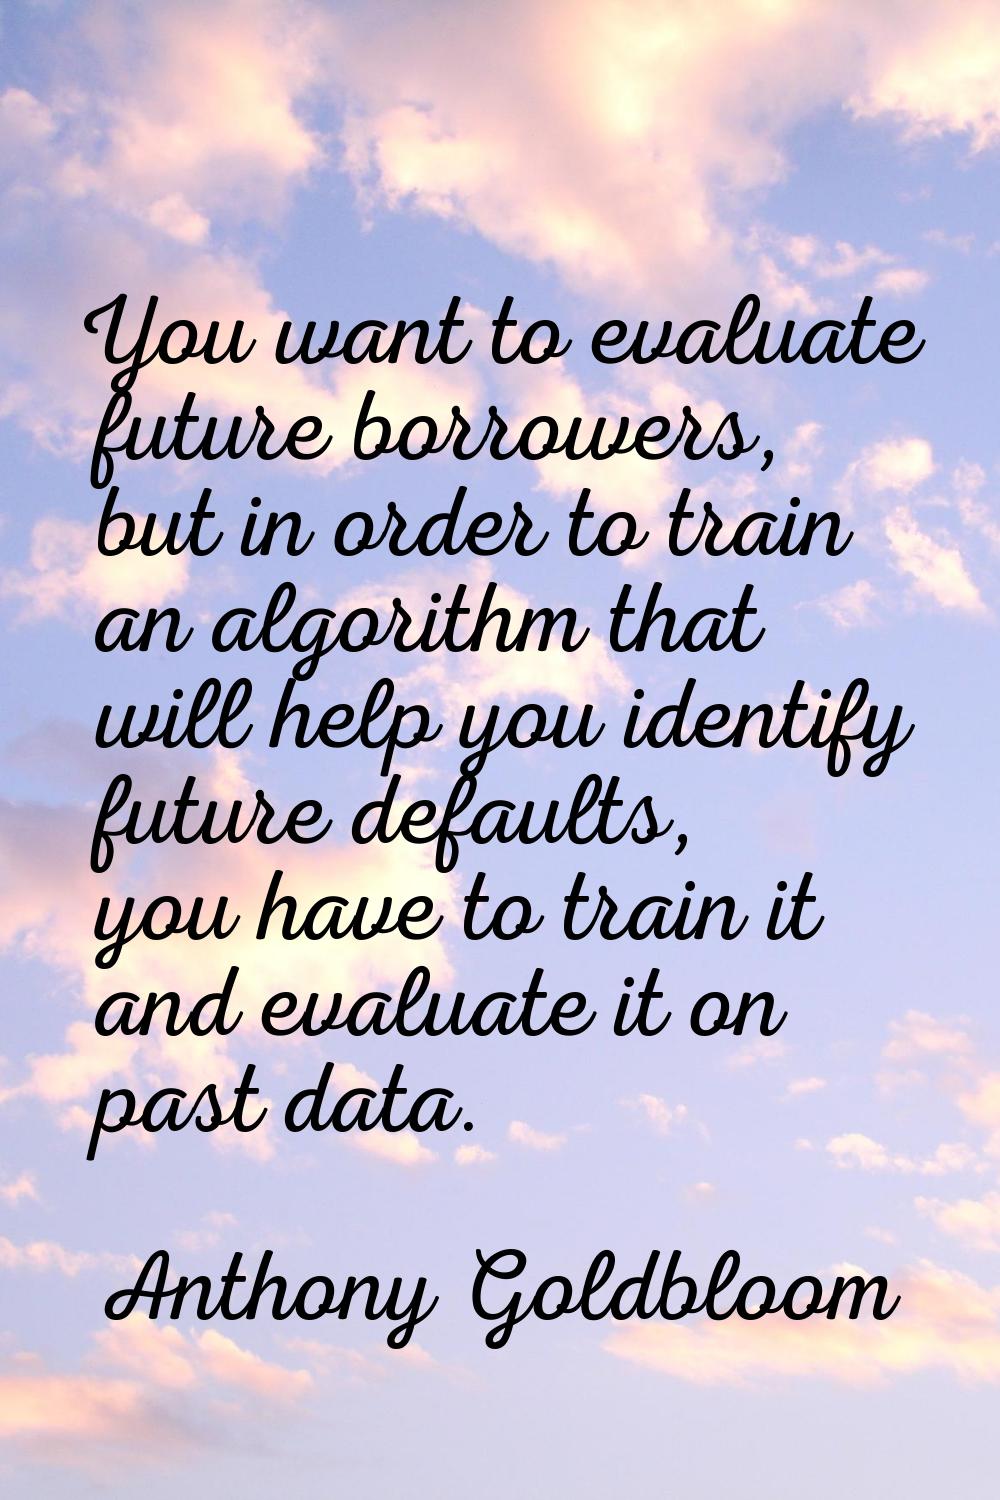 You want to evaluate future borrowers, but in order to train an algorithm that will help you identi